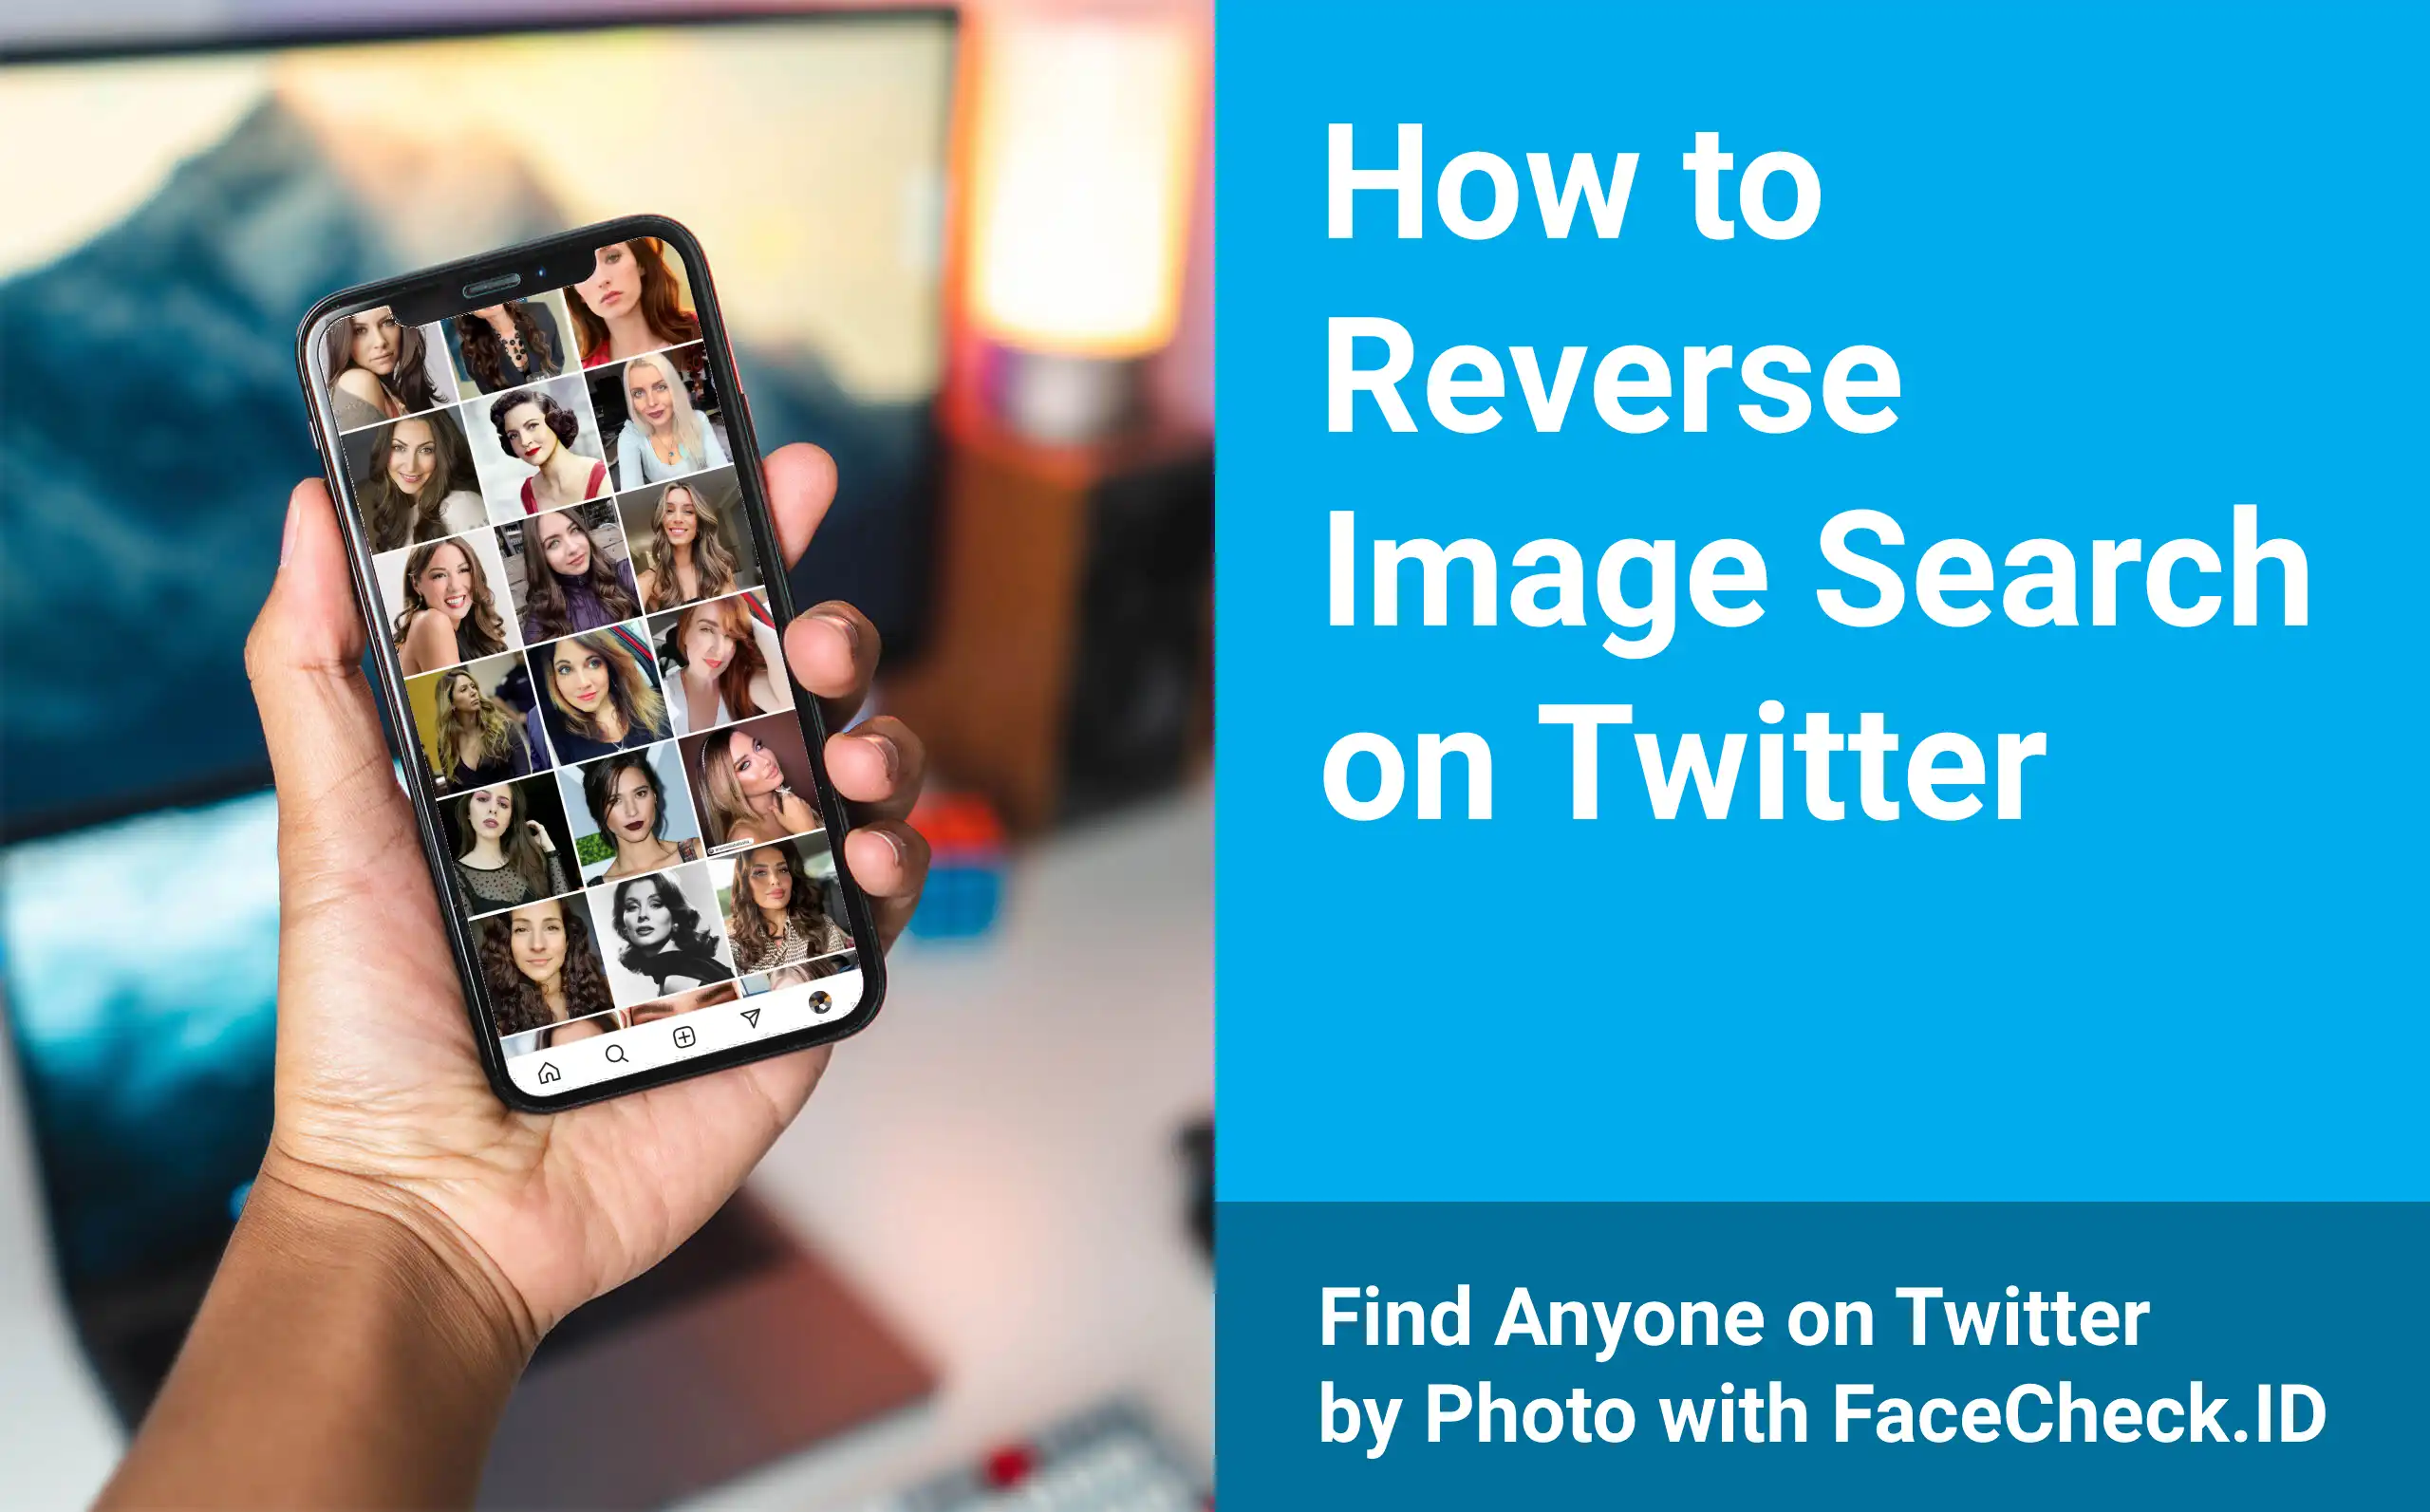 how to reverse image search on Twitter